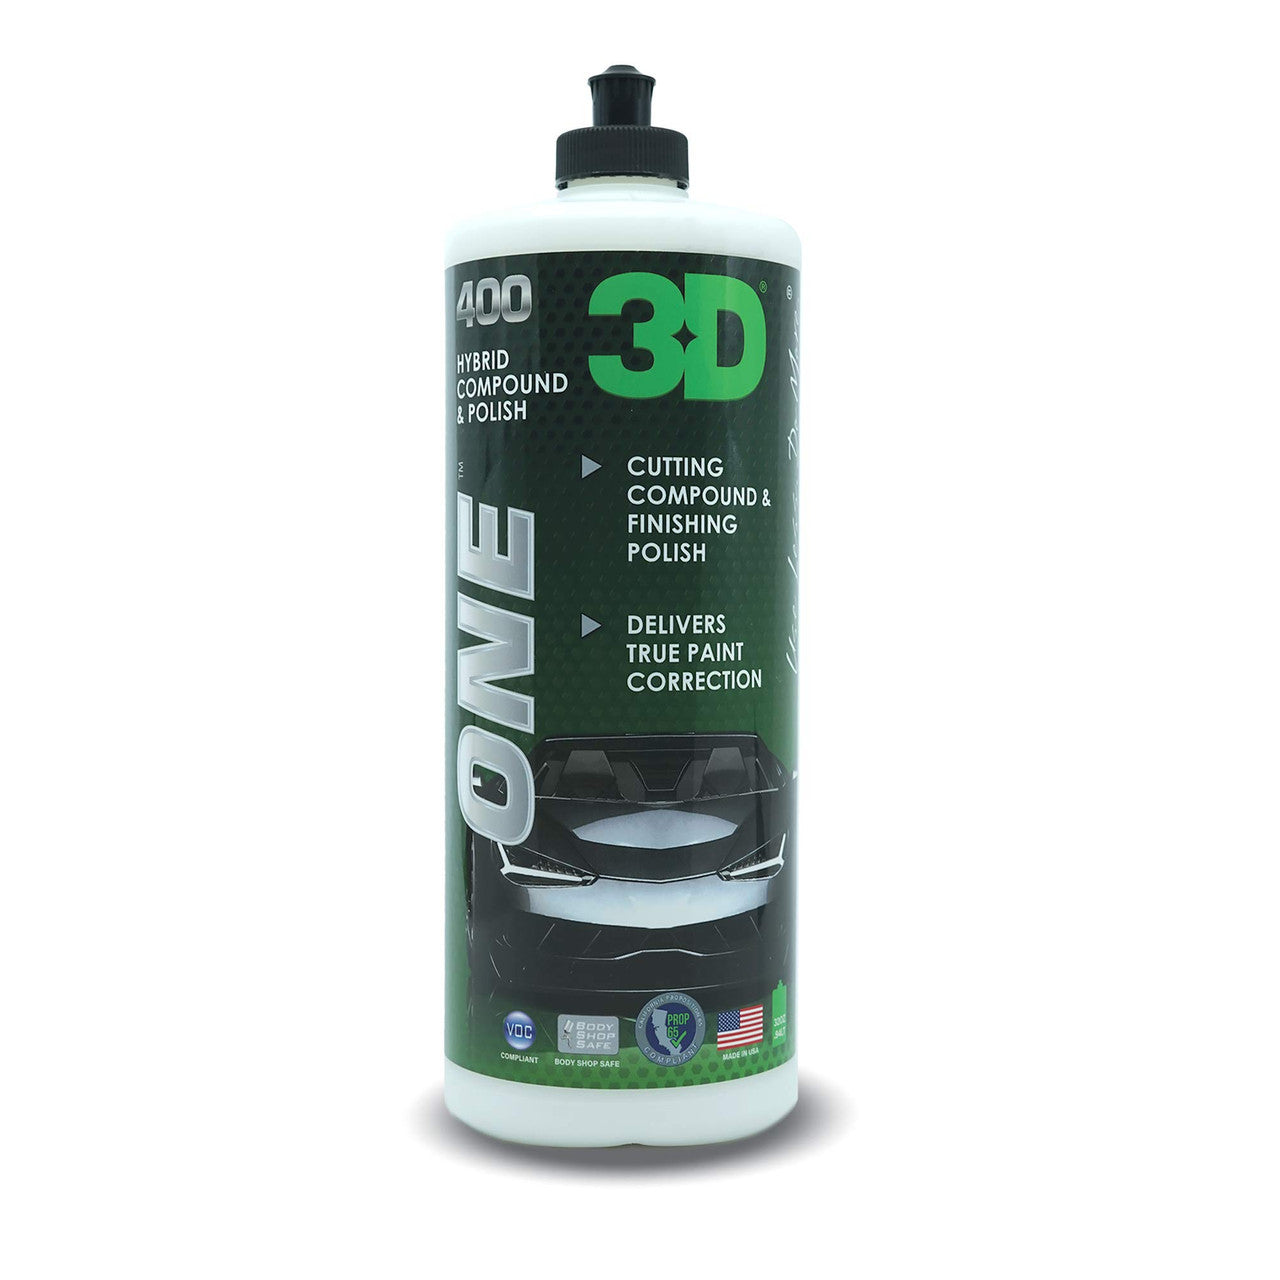 3D One Hybrid Compound and Polish